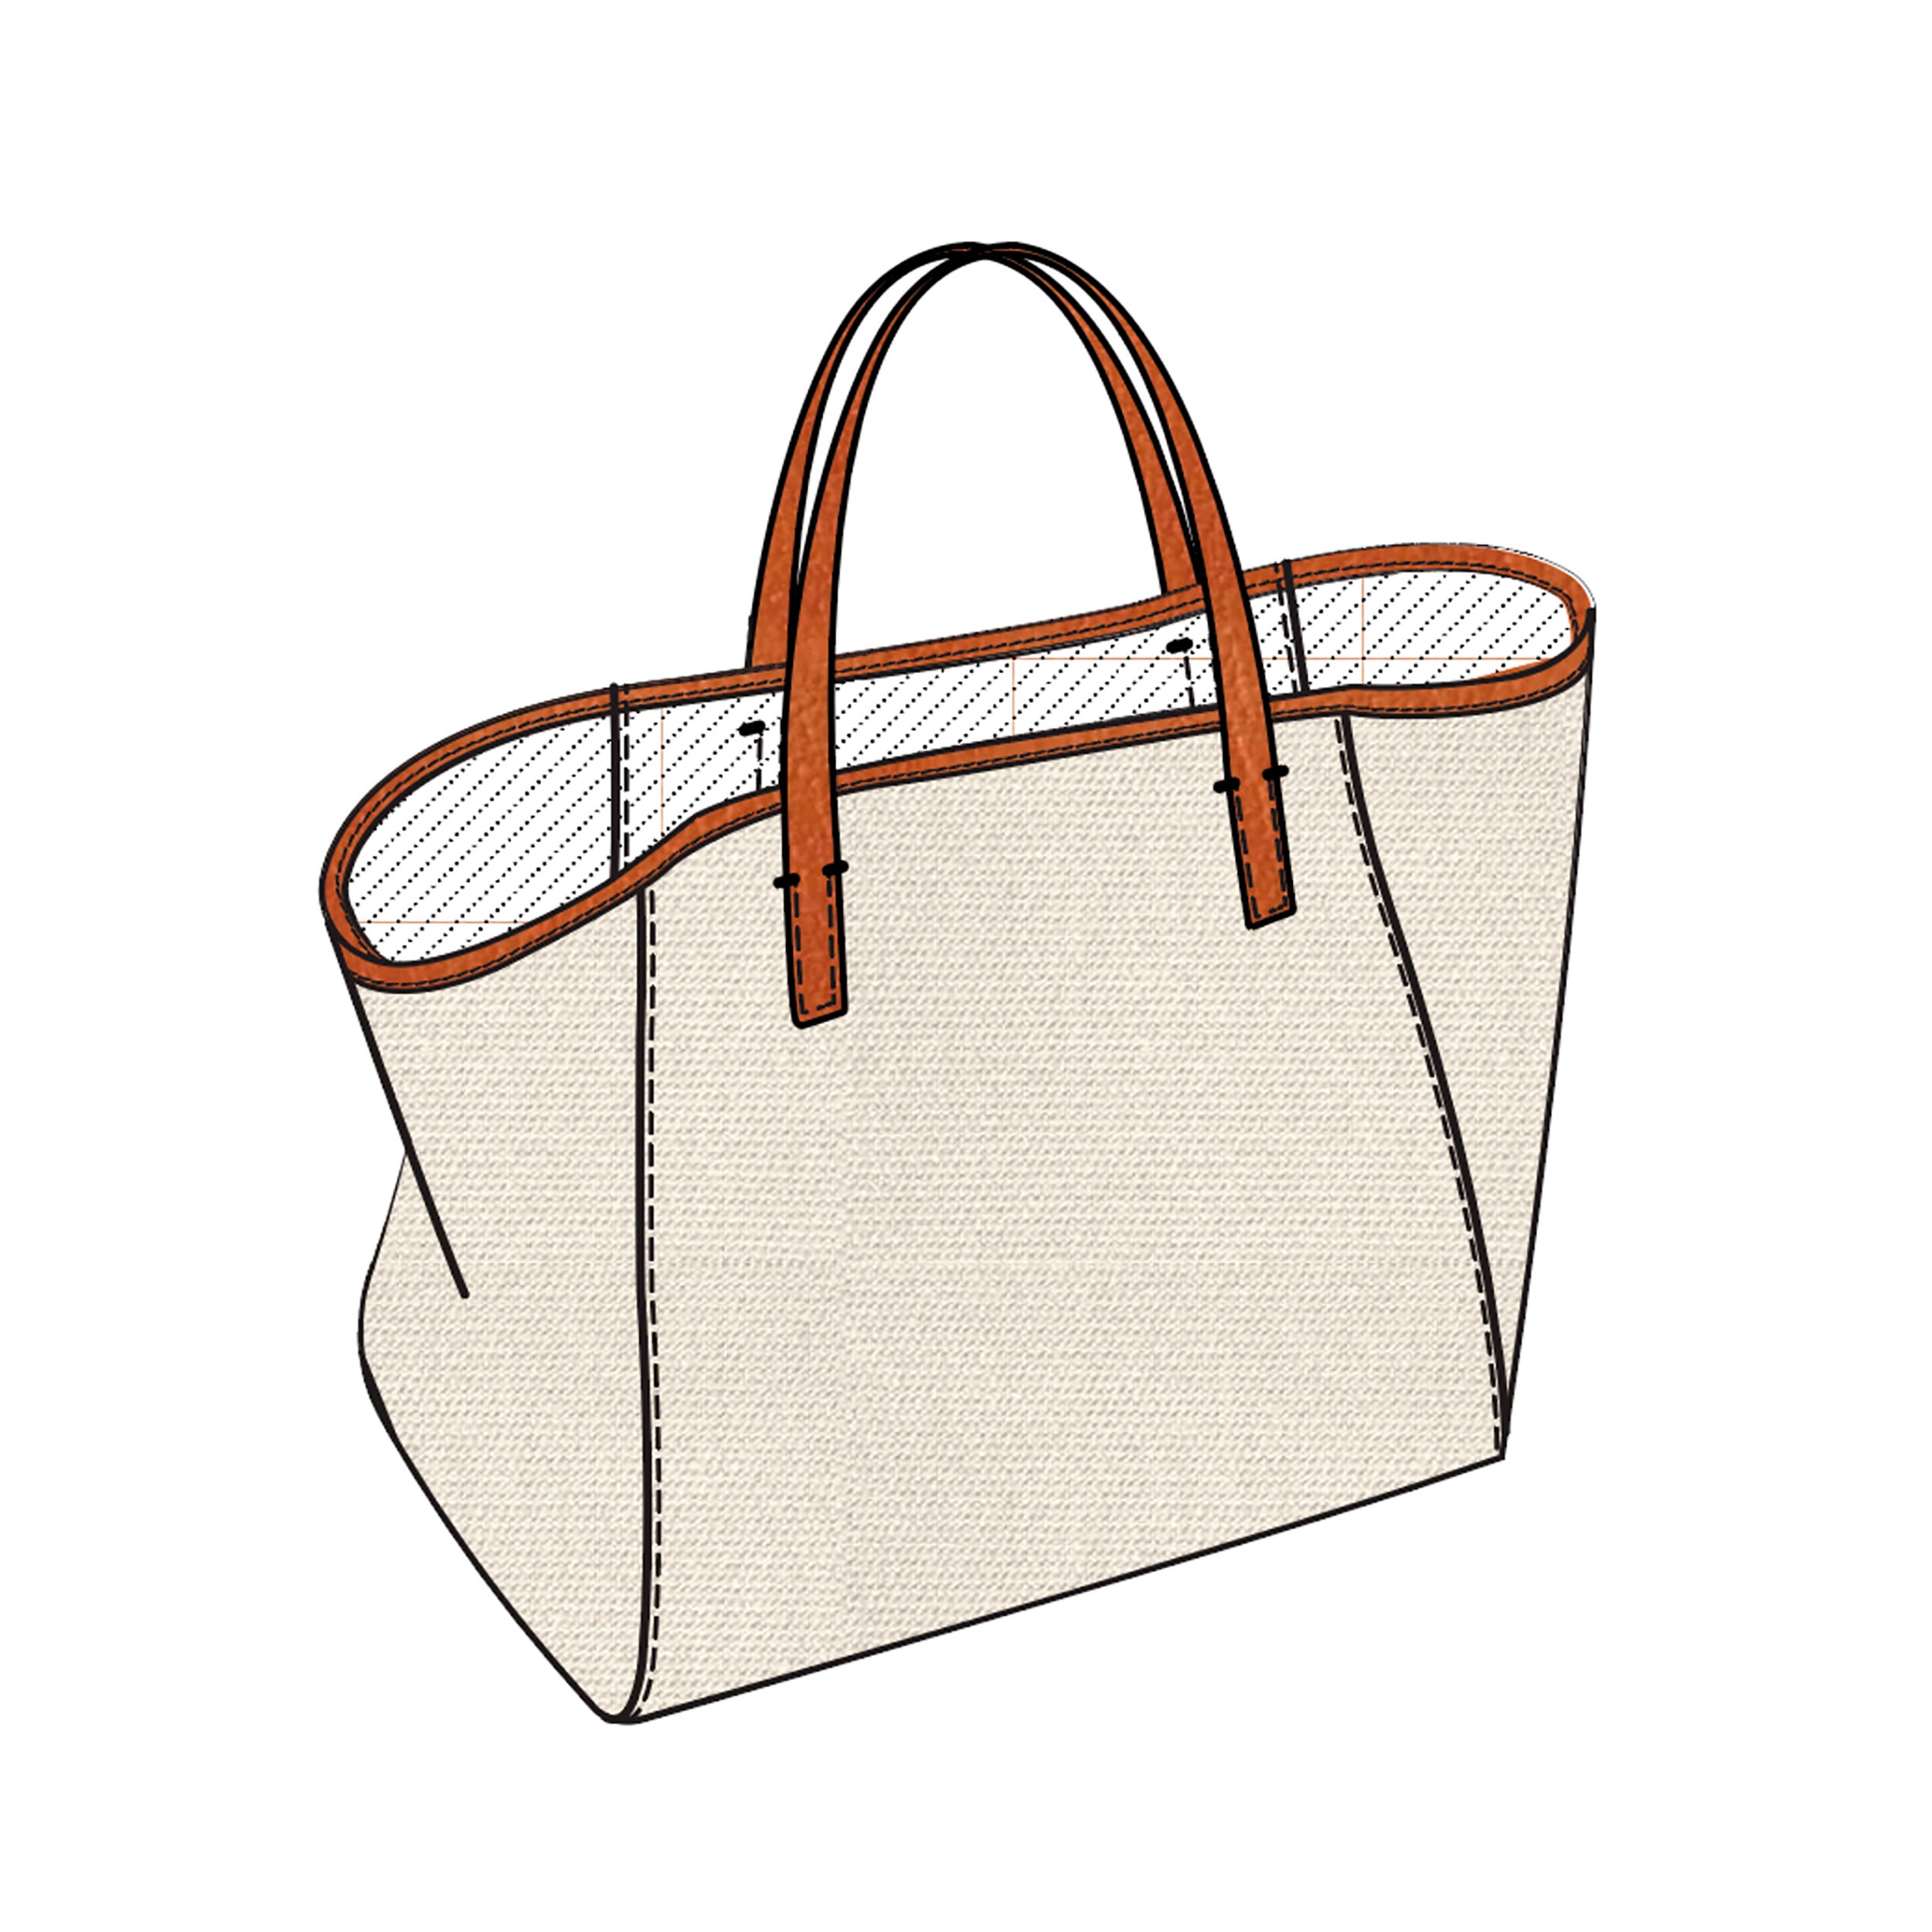 a purse sketch by iimages Vectors & Illustrations with Unlimited Downloads  - Yayimages